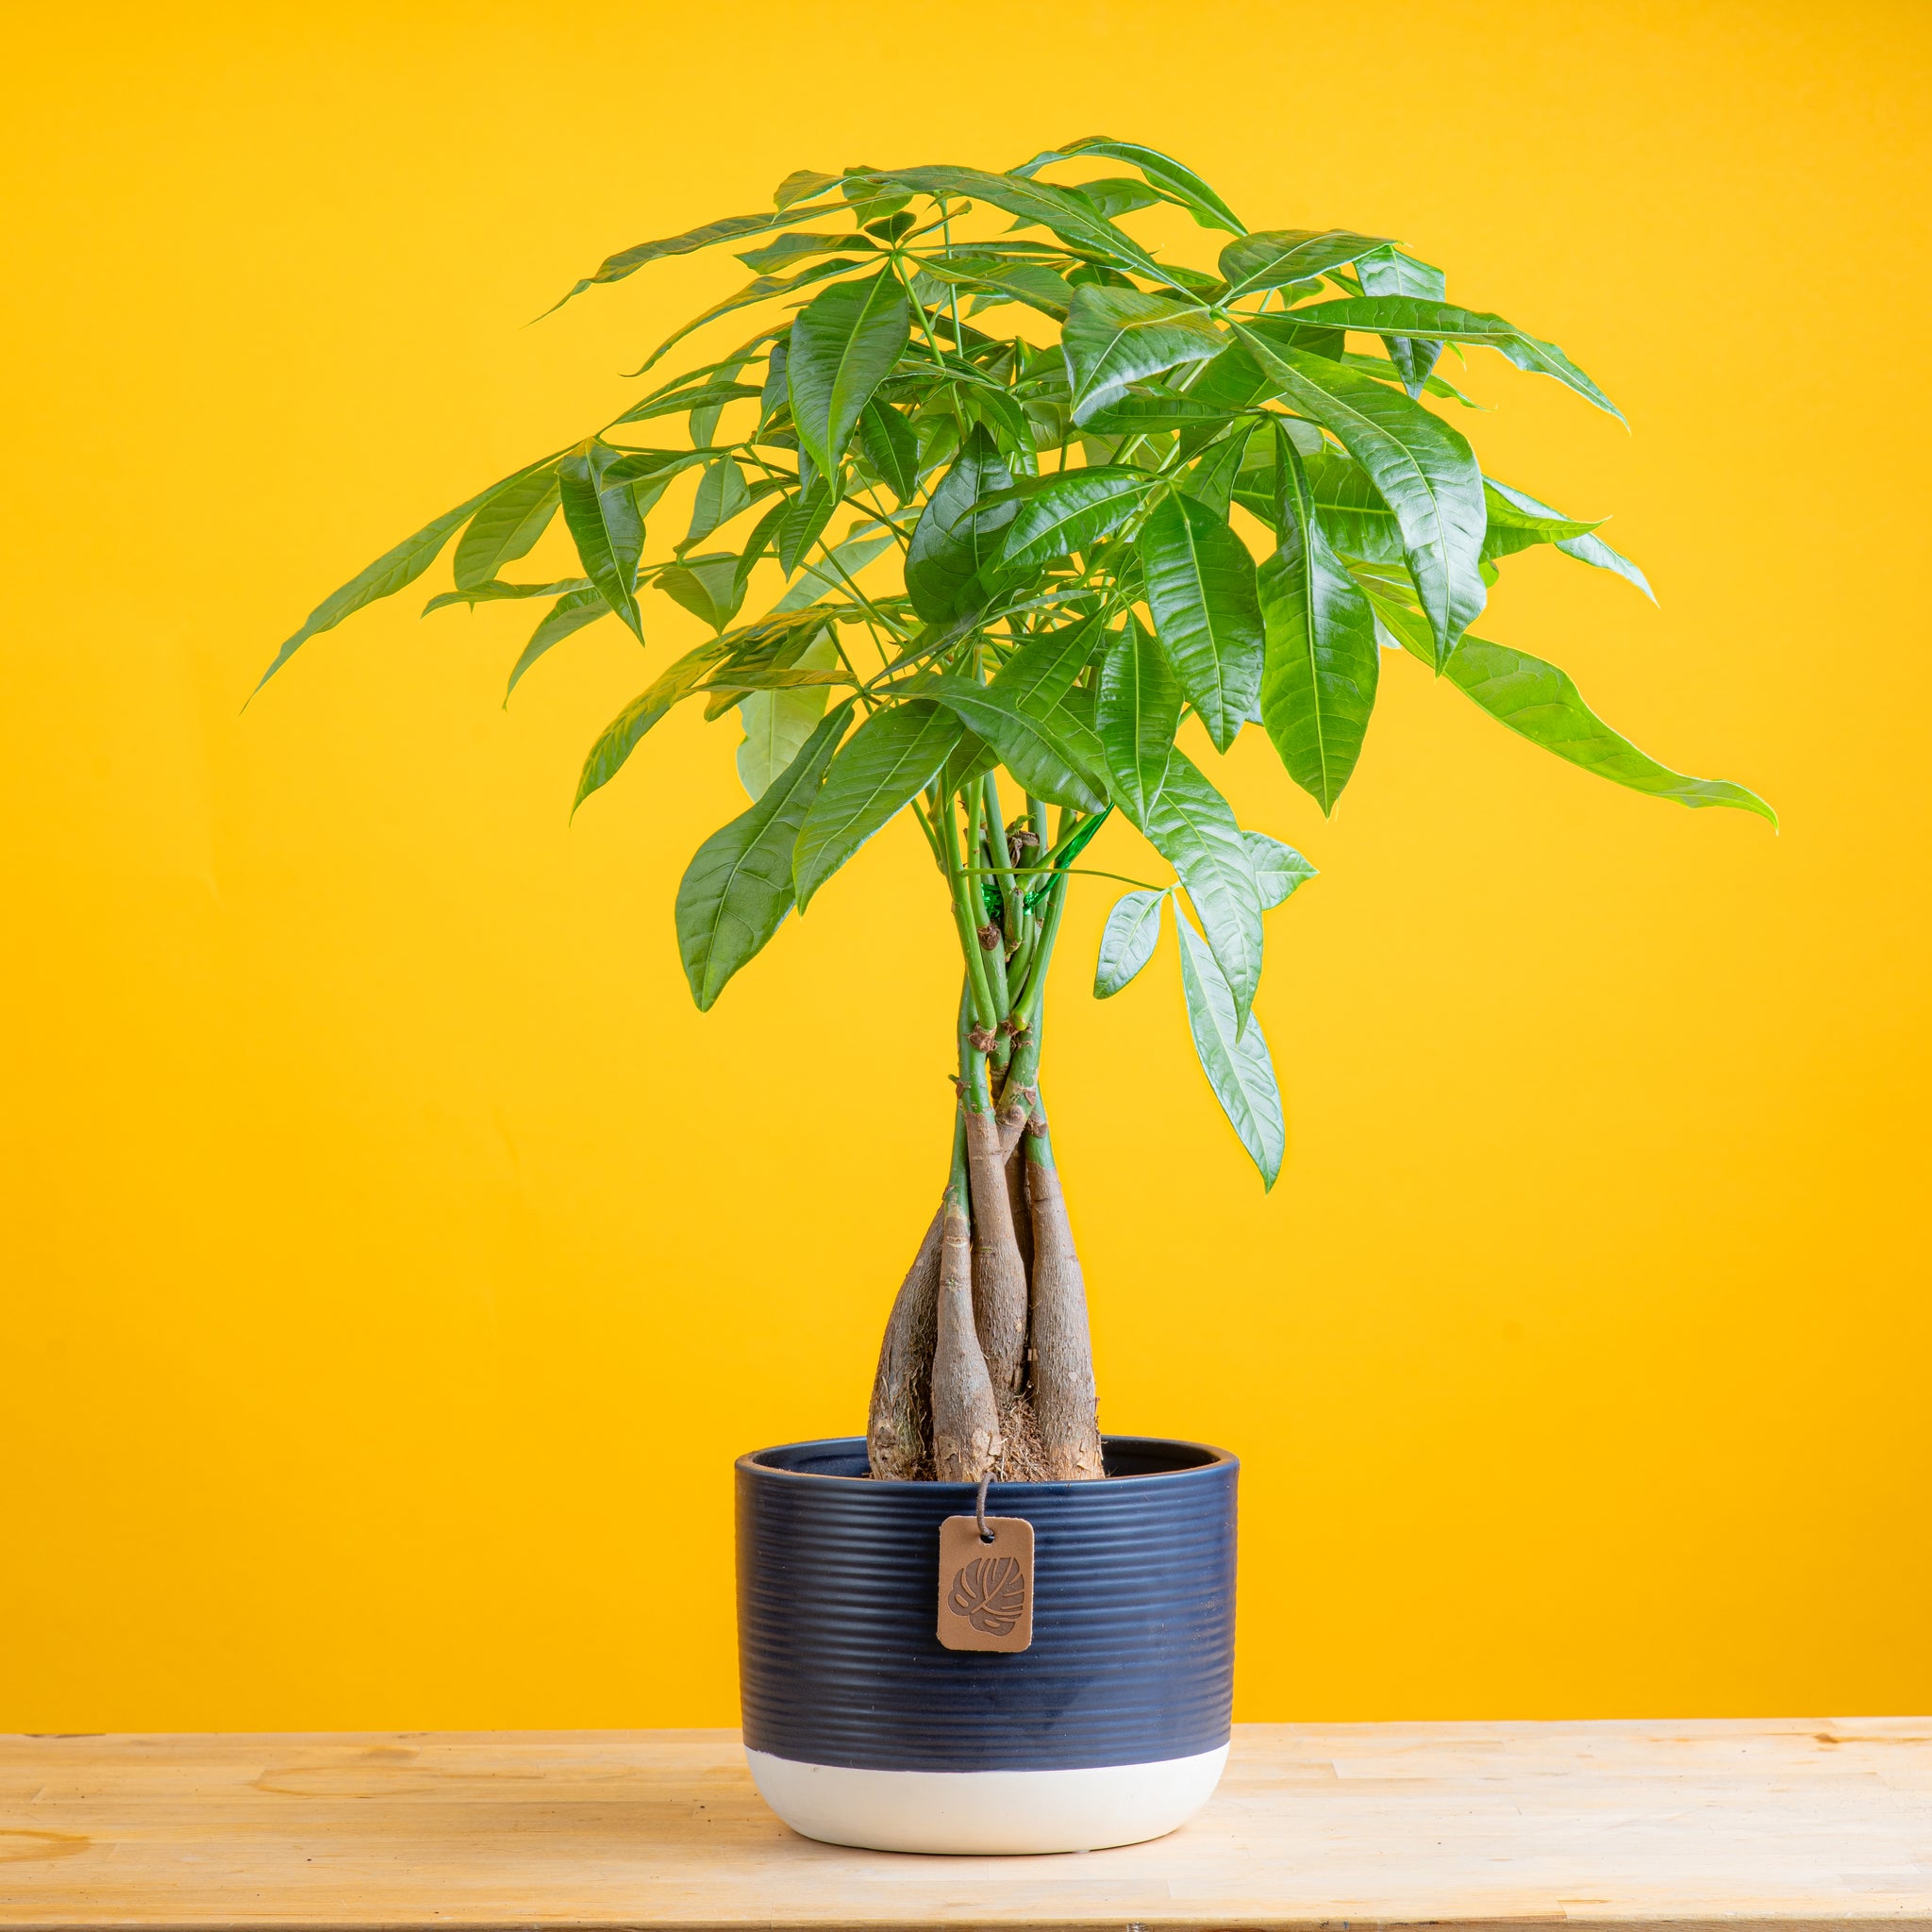 medium braided pachira money tree in a two tones navy and white ceramic pot, set against a bright yellow background 